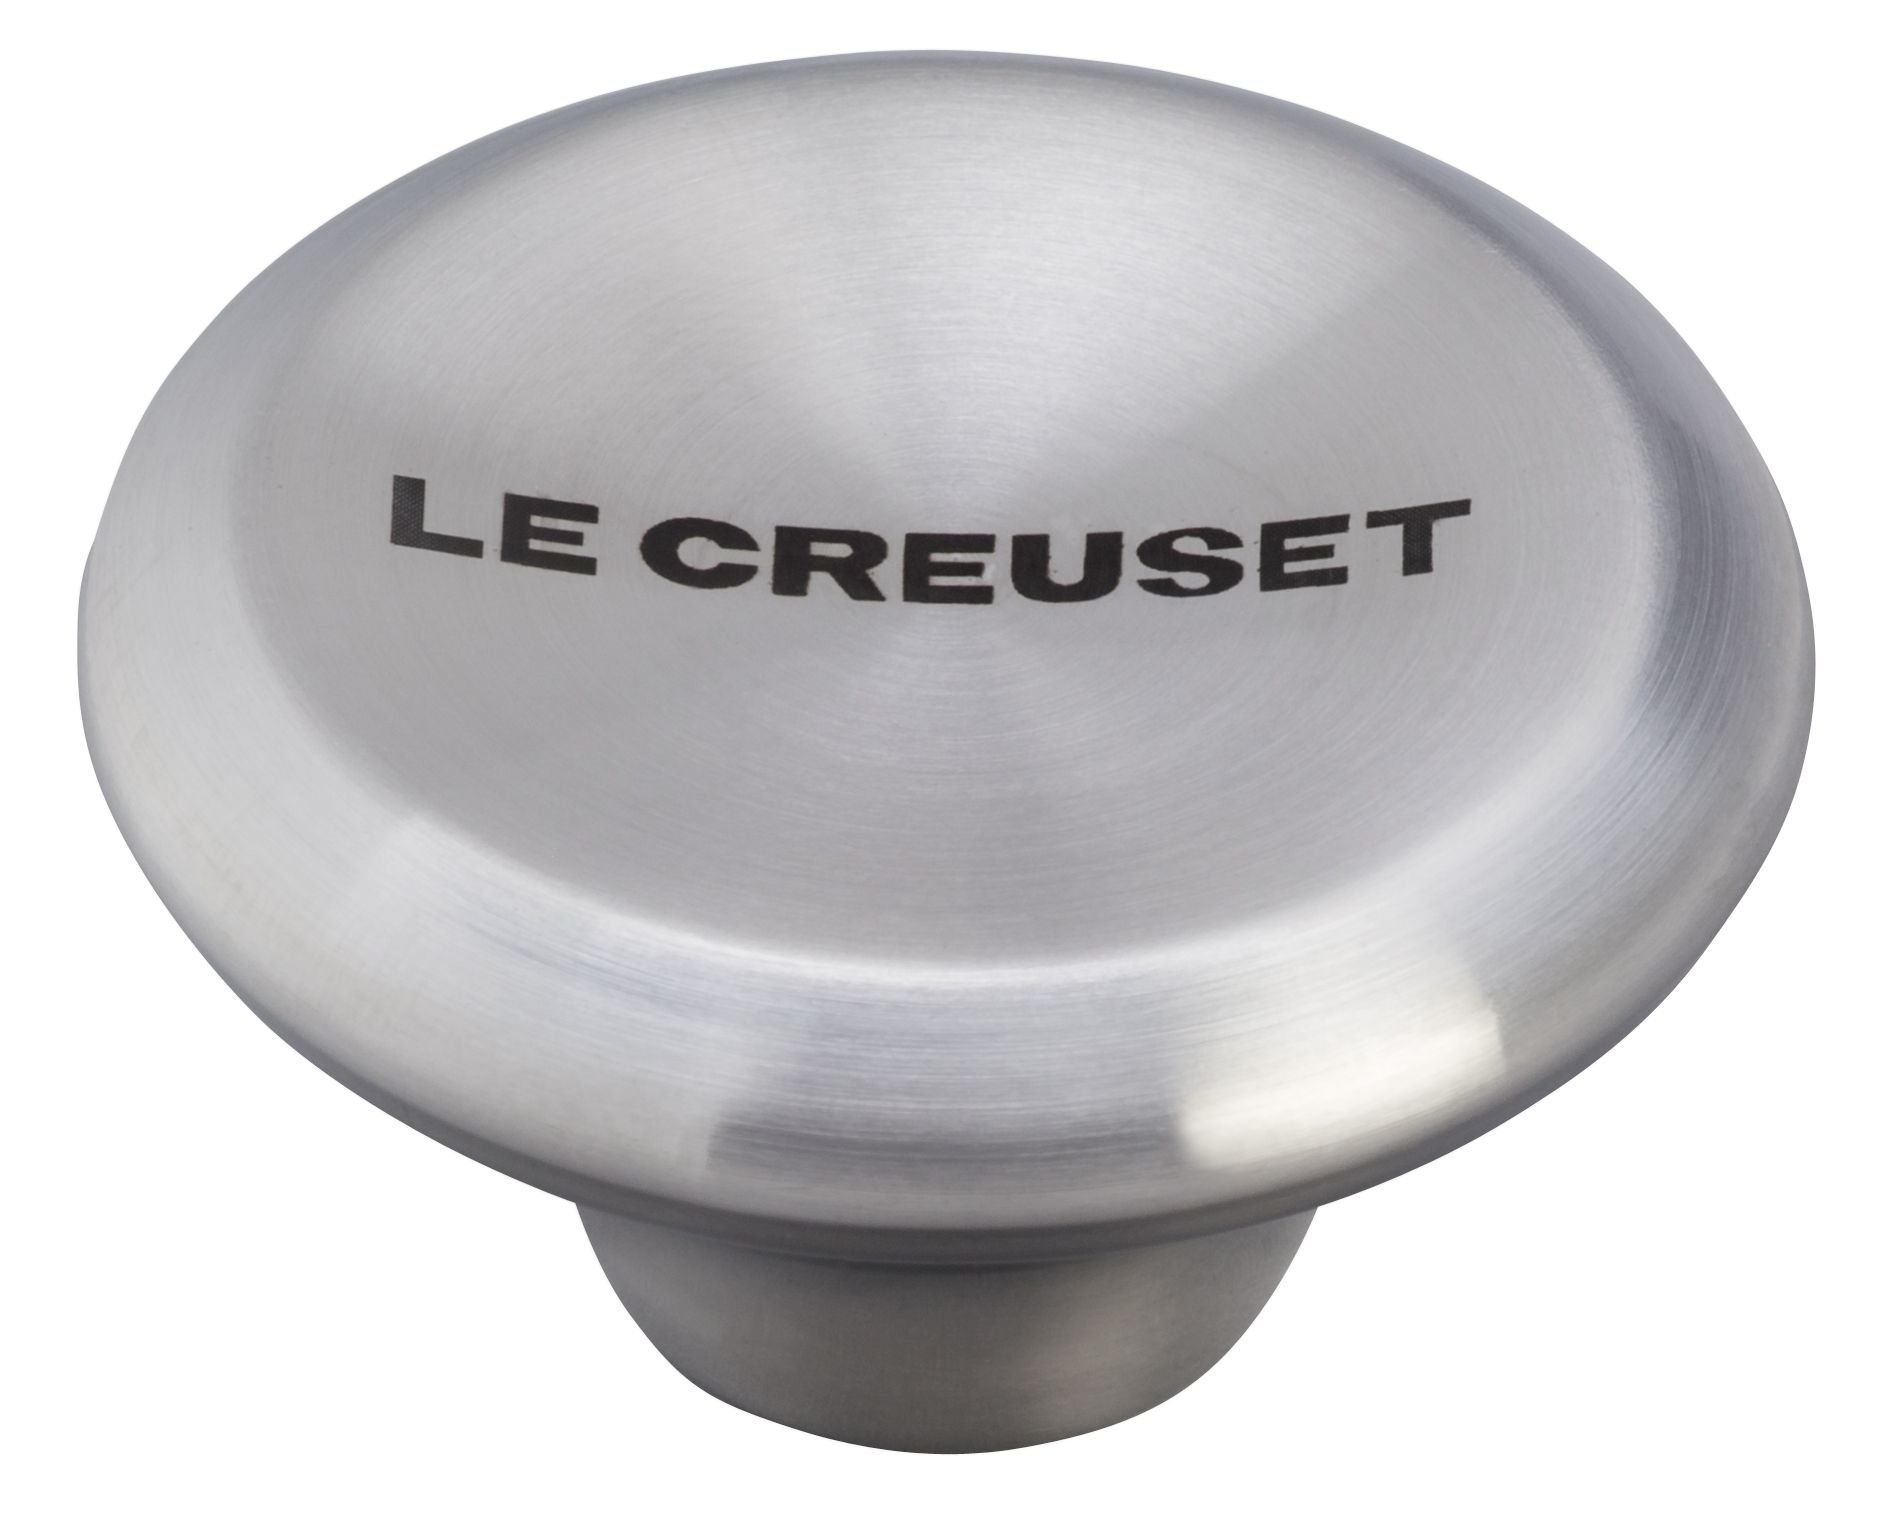 57mm Le Creuset Accessories Replacement Signature Stainless Steel Knob 